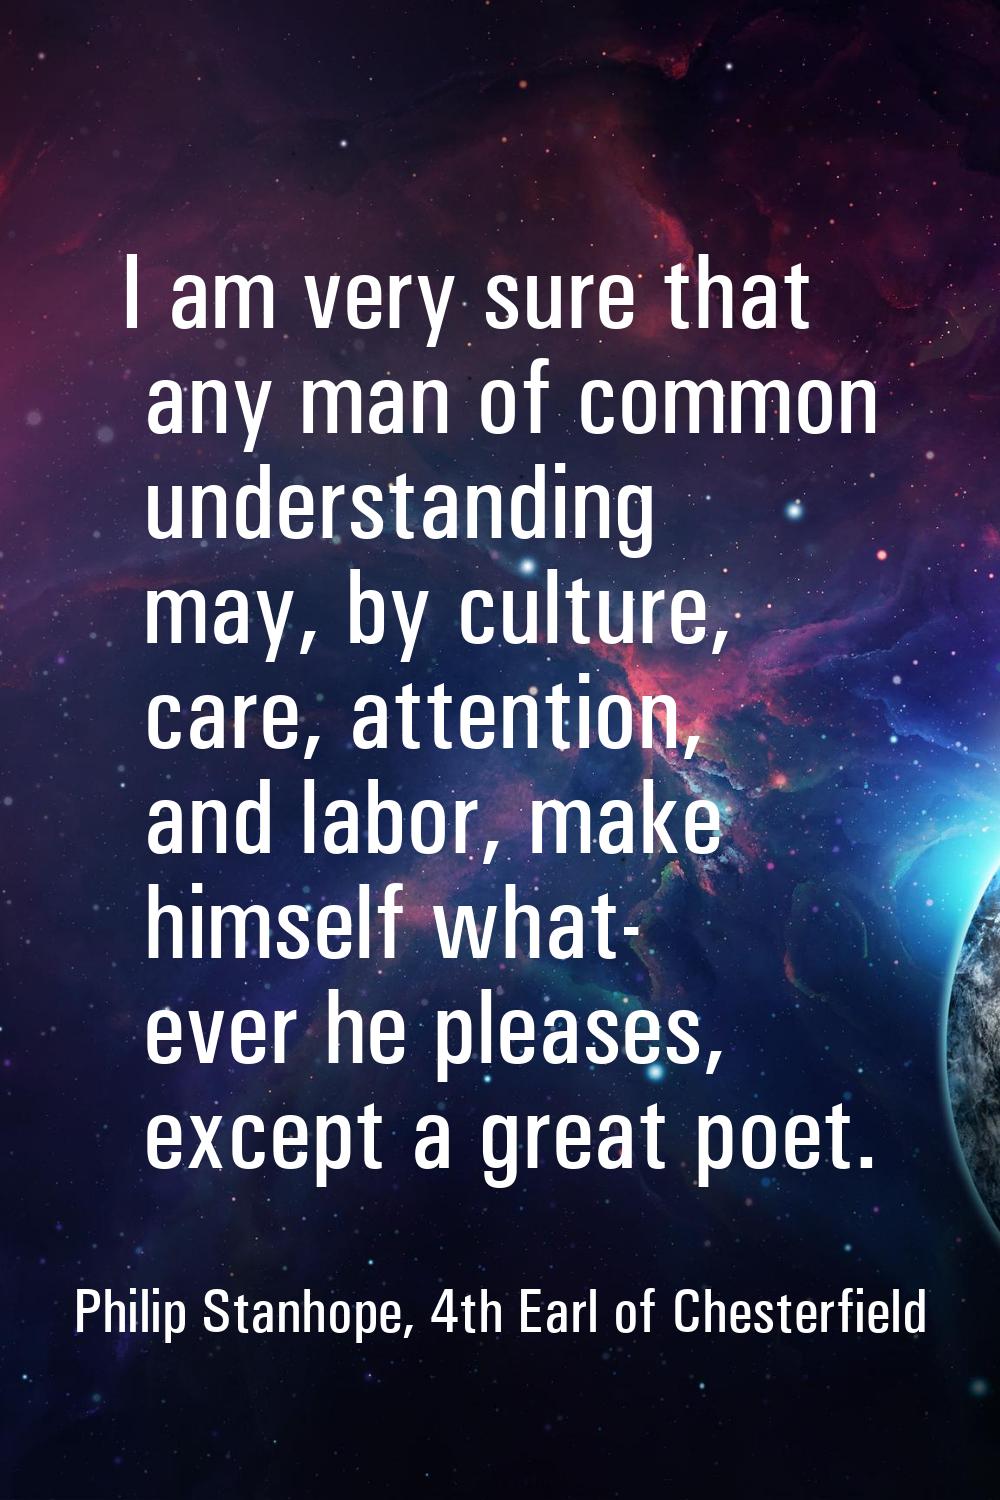 I am very sure that any man of common understanding may, by culture, care, attention, and labor, ma